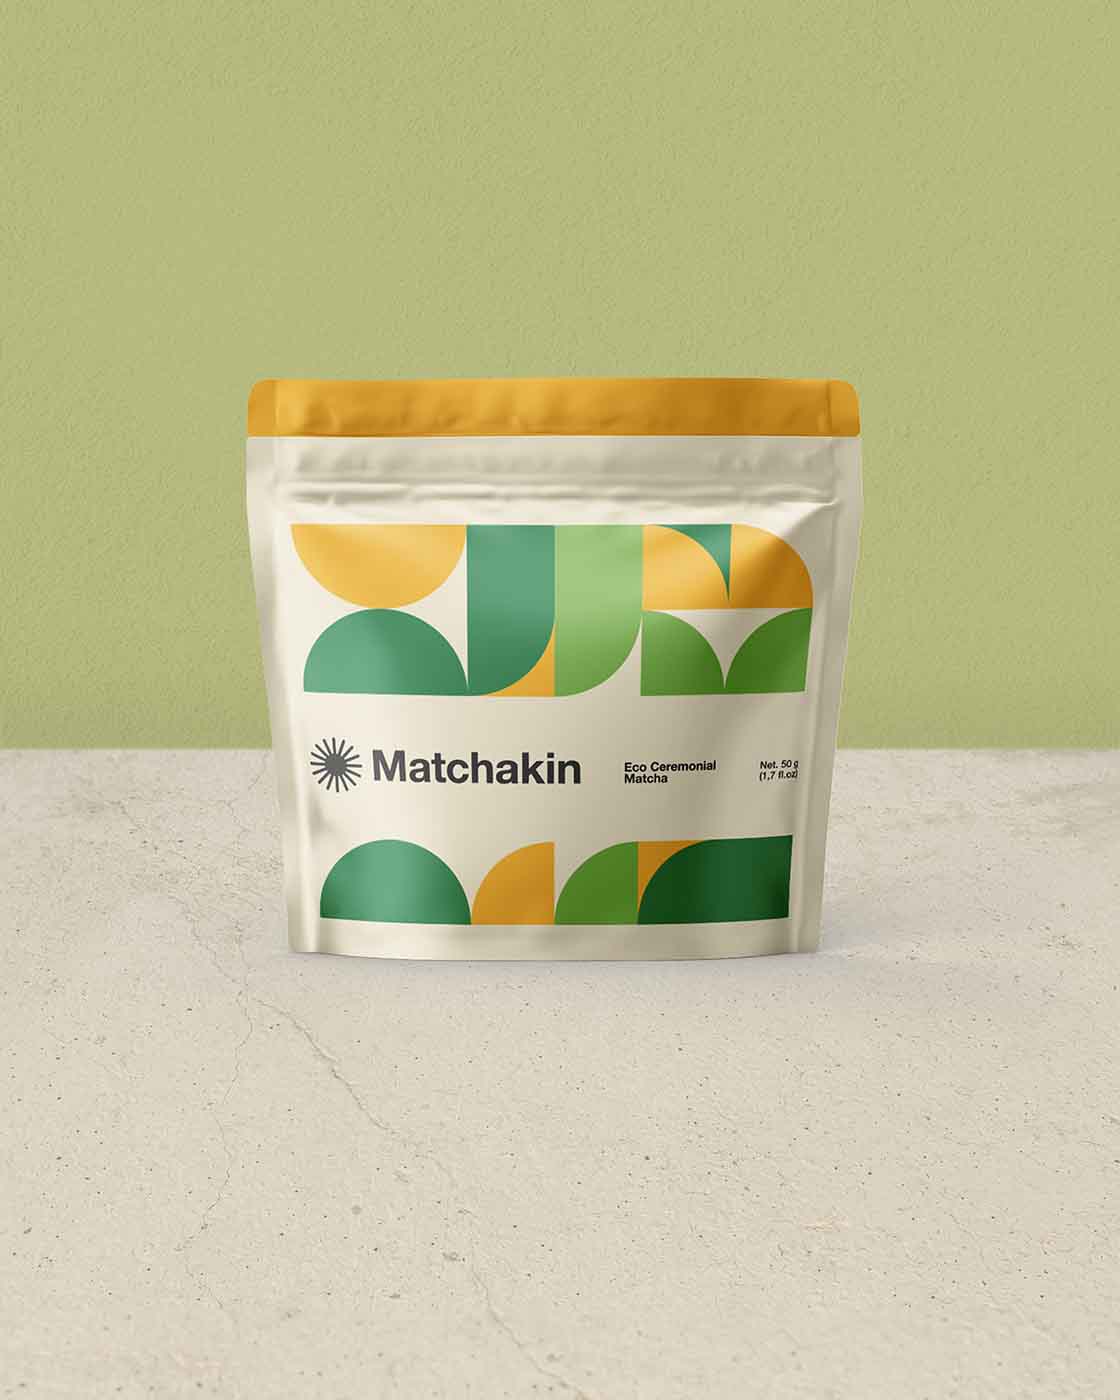 Matchakin Organic Eco Ceremonial Matcha green tea powder made in Japan, 50 grams in pouch bags 